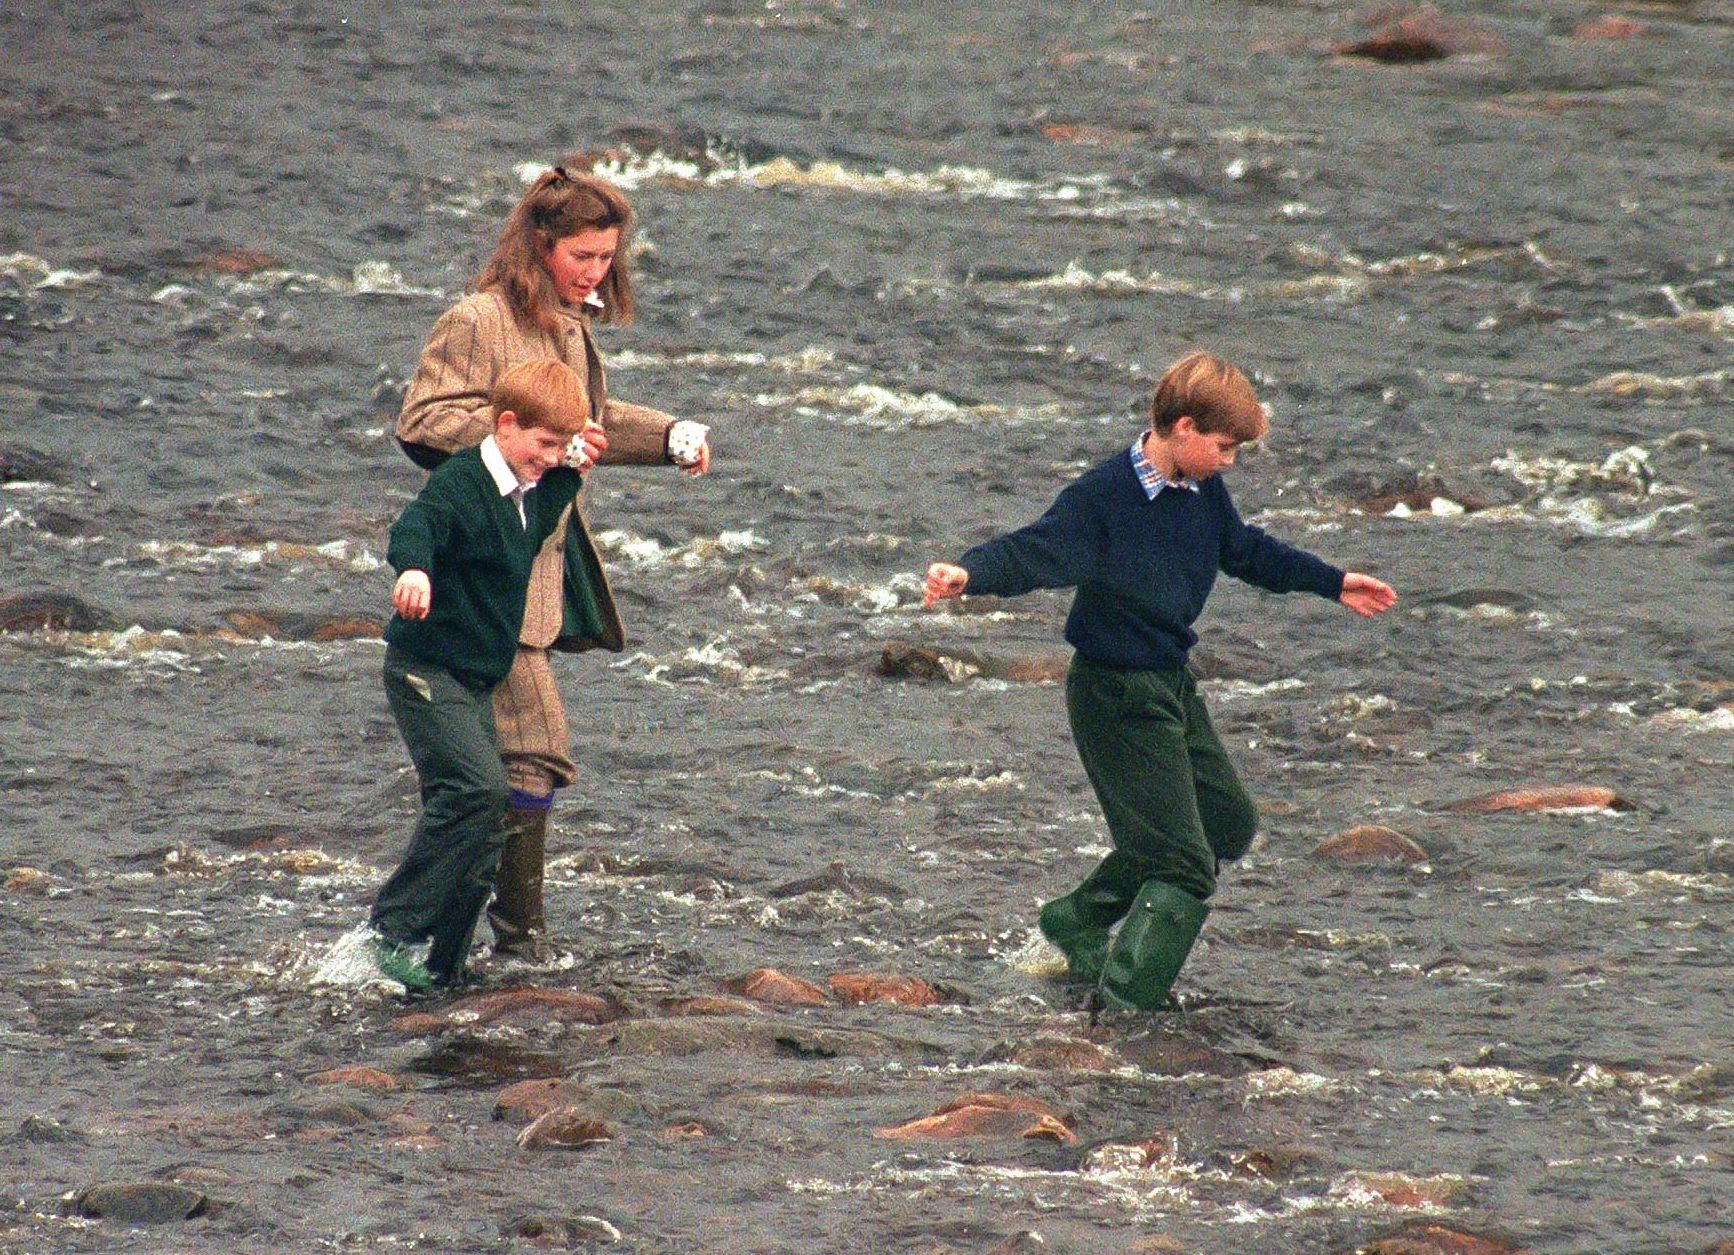 Royal Nanny, Tiggy Legge-Bourke, Prince William,and Prince Harry walk in the River Gairn, near the Balmoral Estate on October 22, 1994 in Balmoral, Scotland | Getty Images